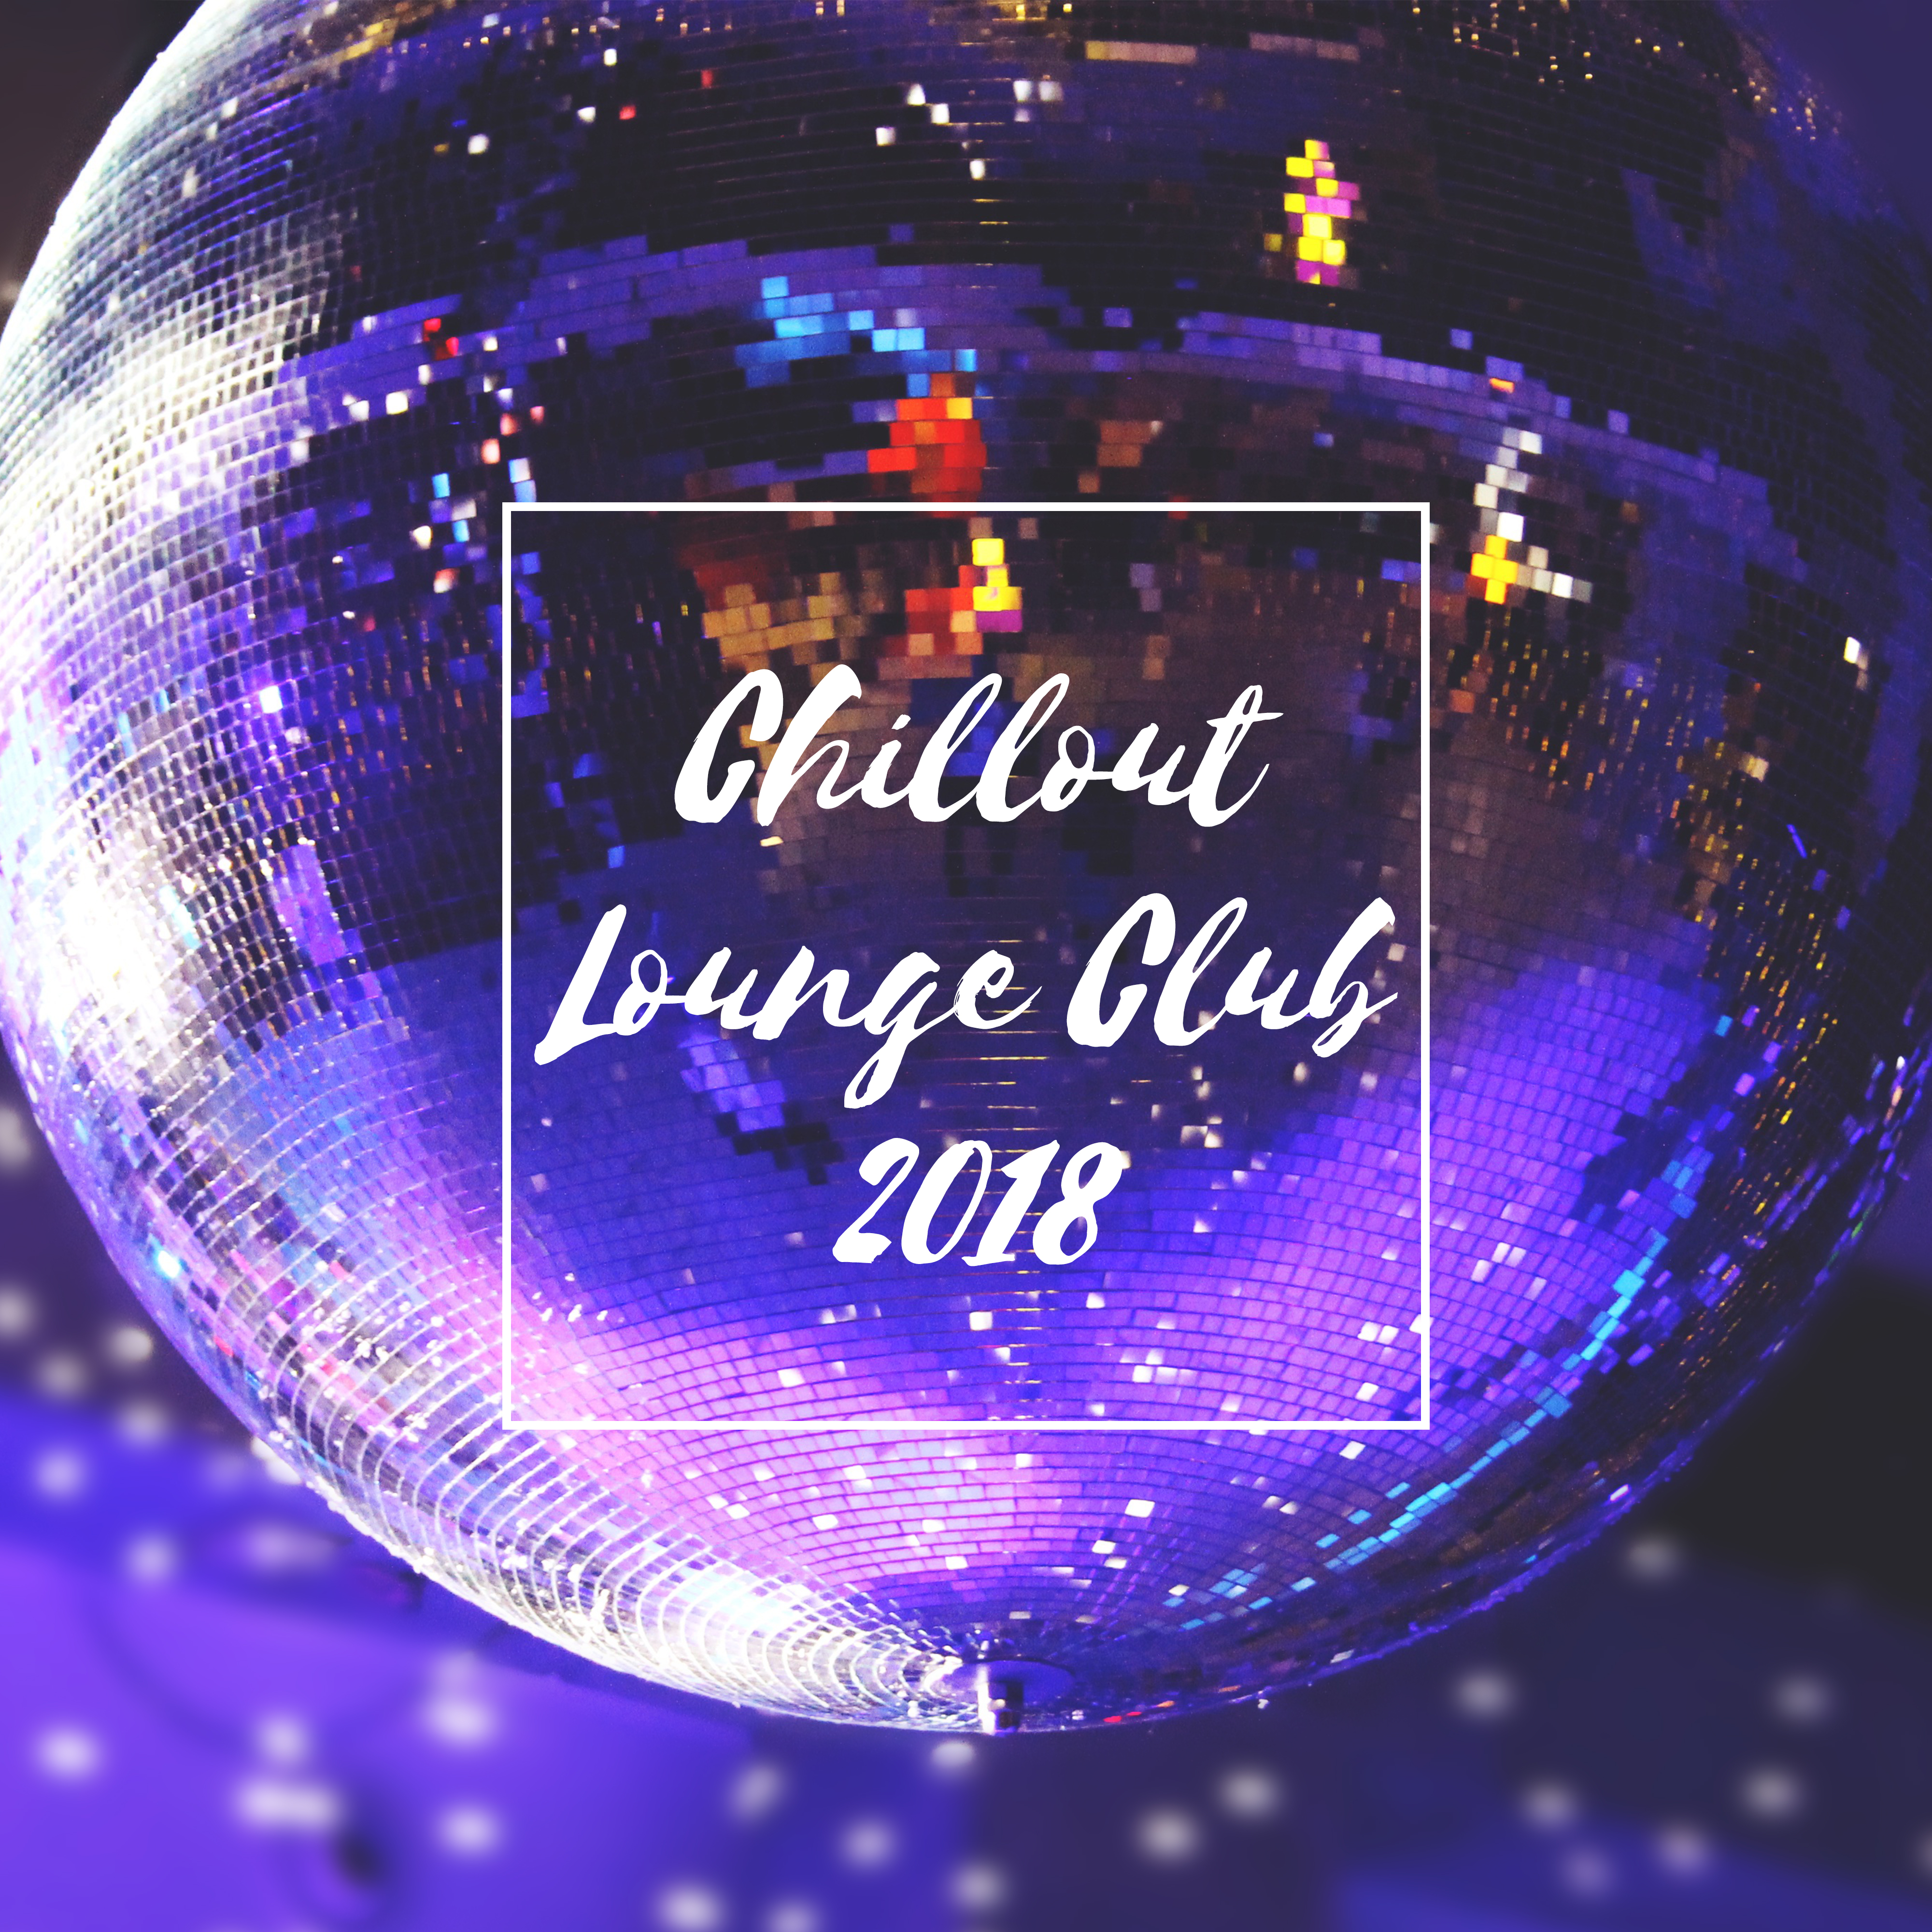 Chillout Lounge Club 2018